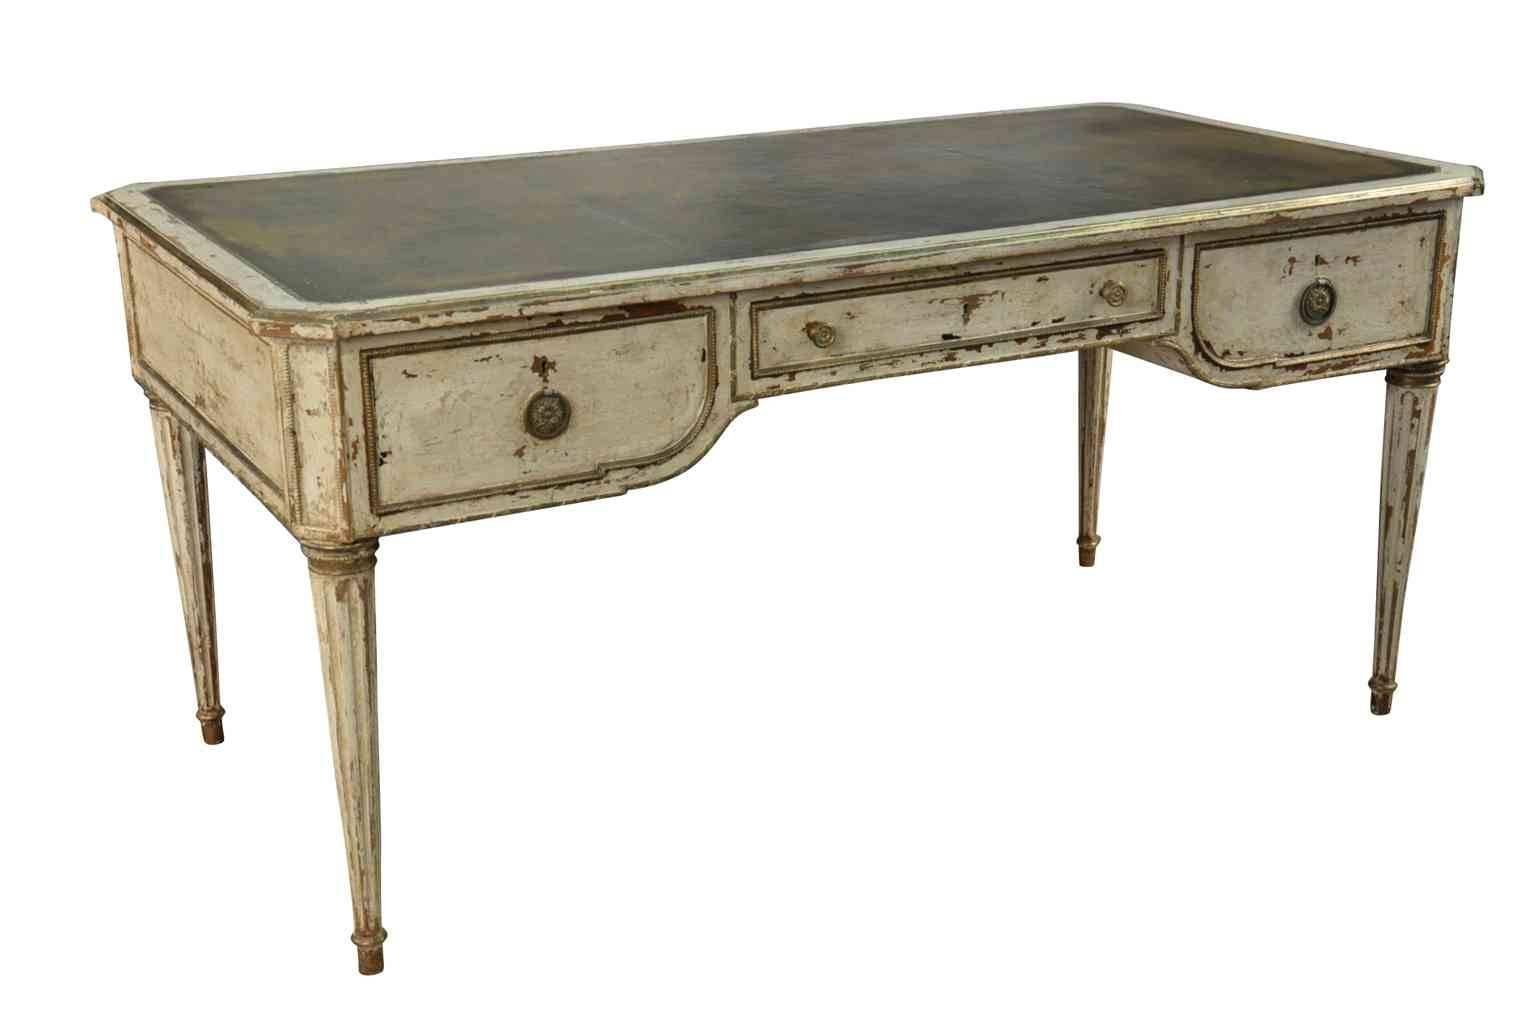 A very lovely 19th century French Louis XVI style desk or writing table in painted wood with leather inset top. Wonderful painted finish and patina. The finish is in a 